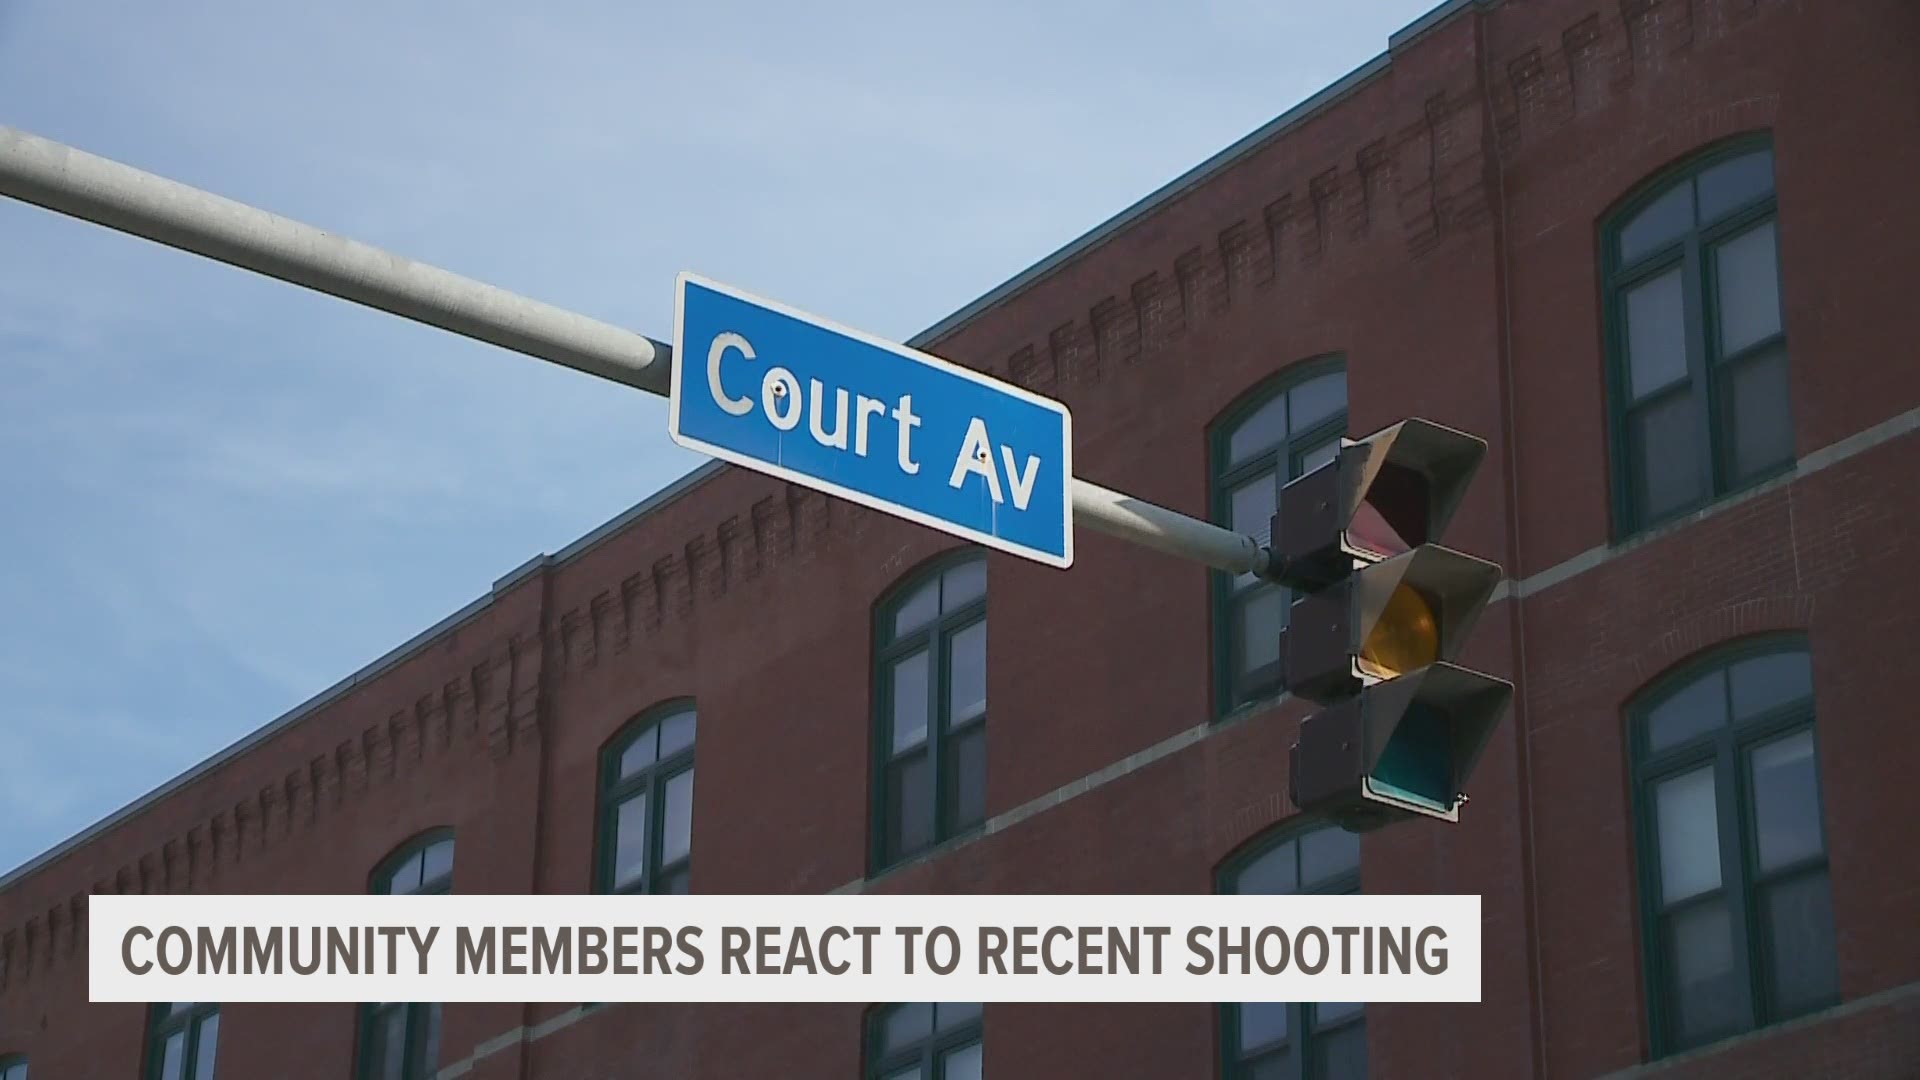 Community members and business owners discussed how they felt after the shooting Sunday morning on Court Avenue.